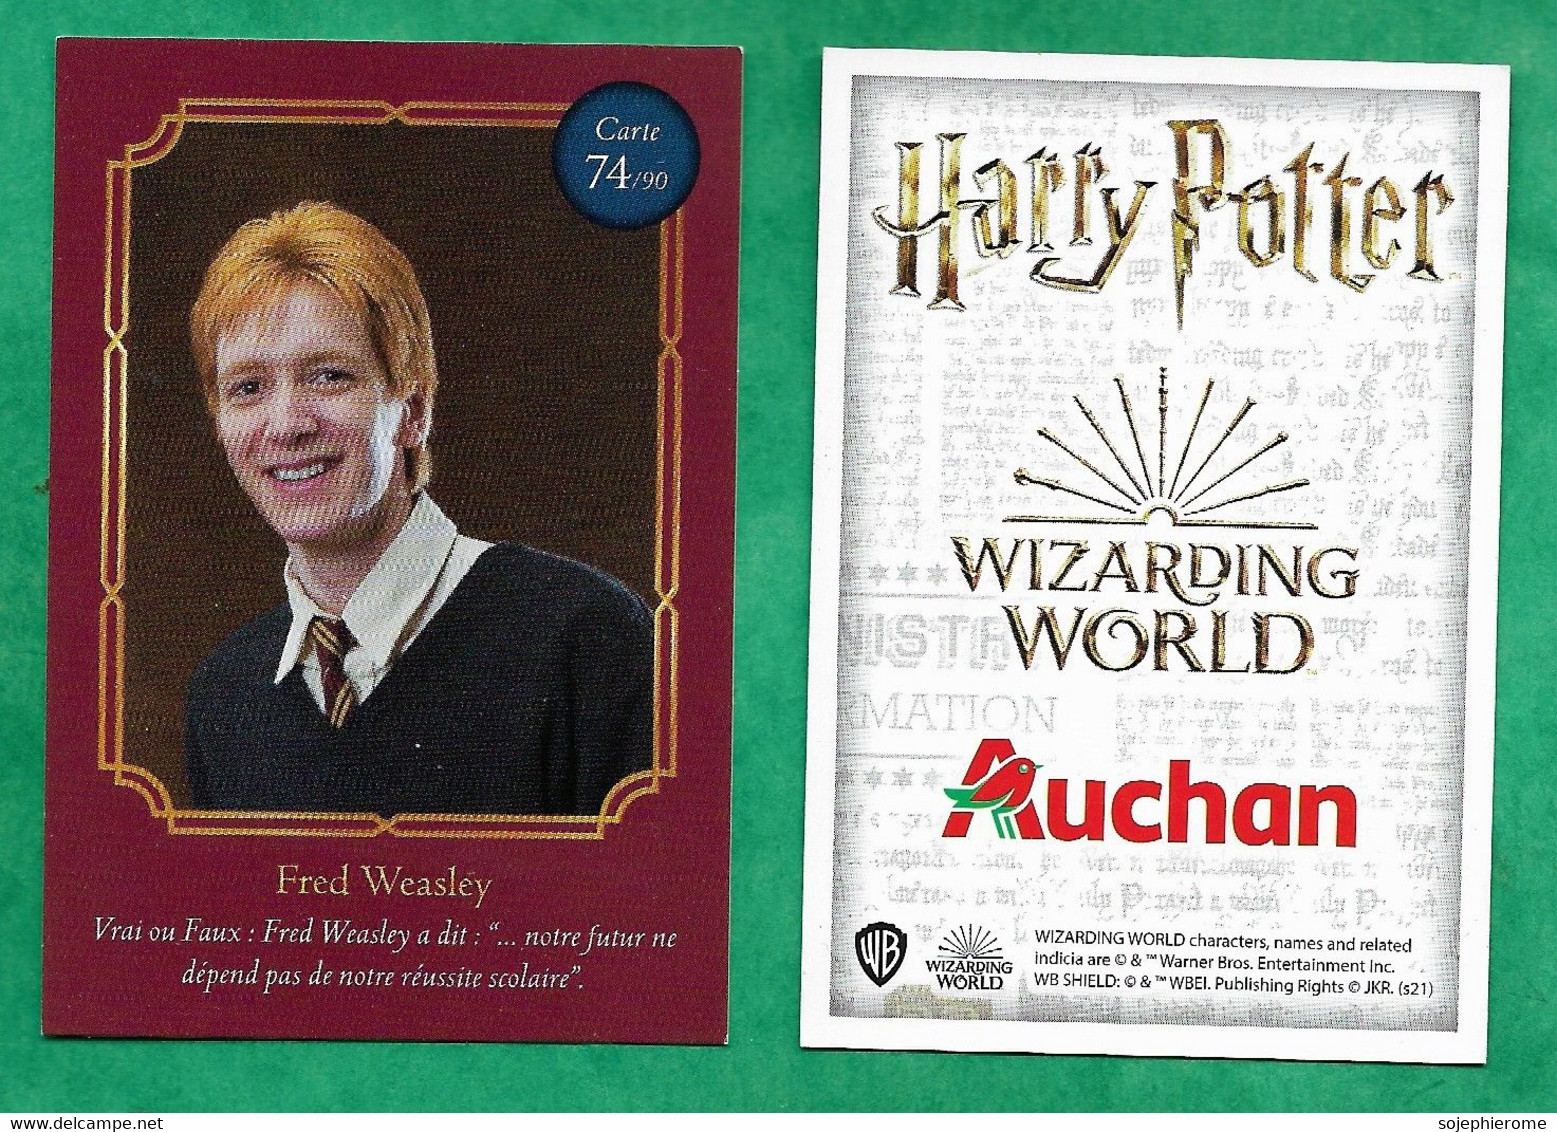 Auchan "Harry Potter Wizarding World" Fred Weasley 74/90 - 2scans - Harry Potter